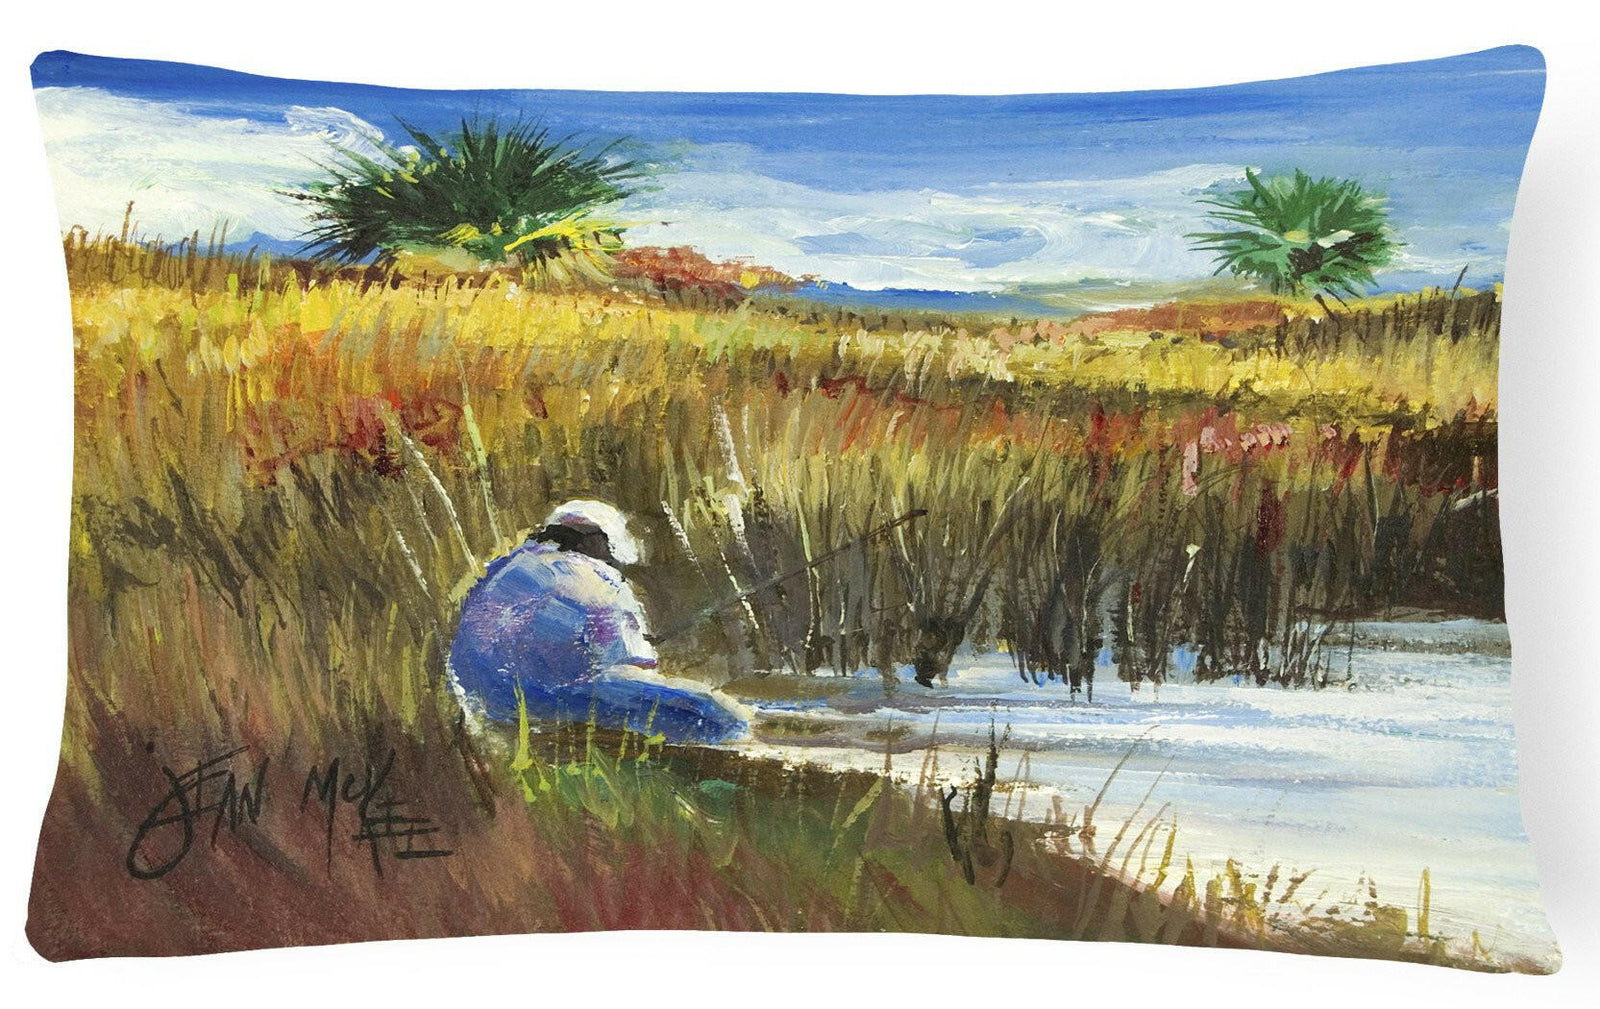 Fisherman on the Bank Canvas Fabric Decorative Pillow JMK1125PW1216 by Caroline's Treasures